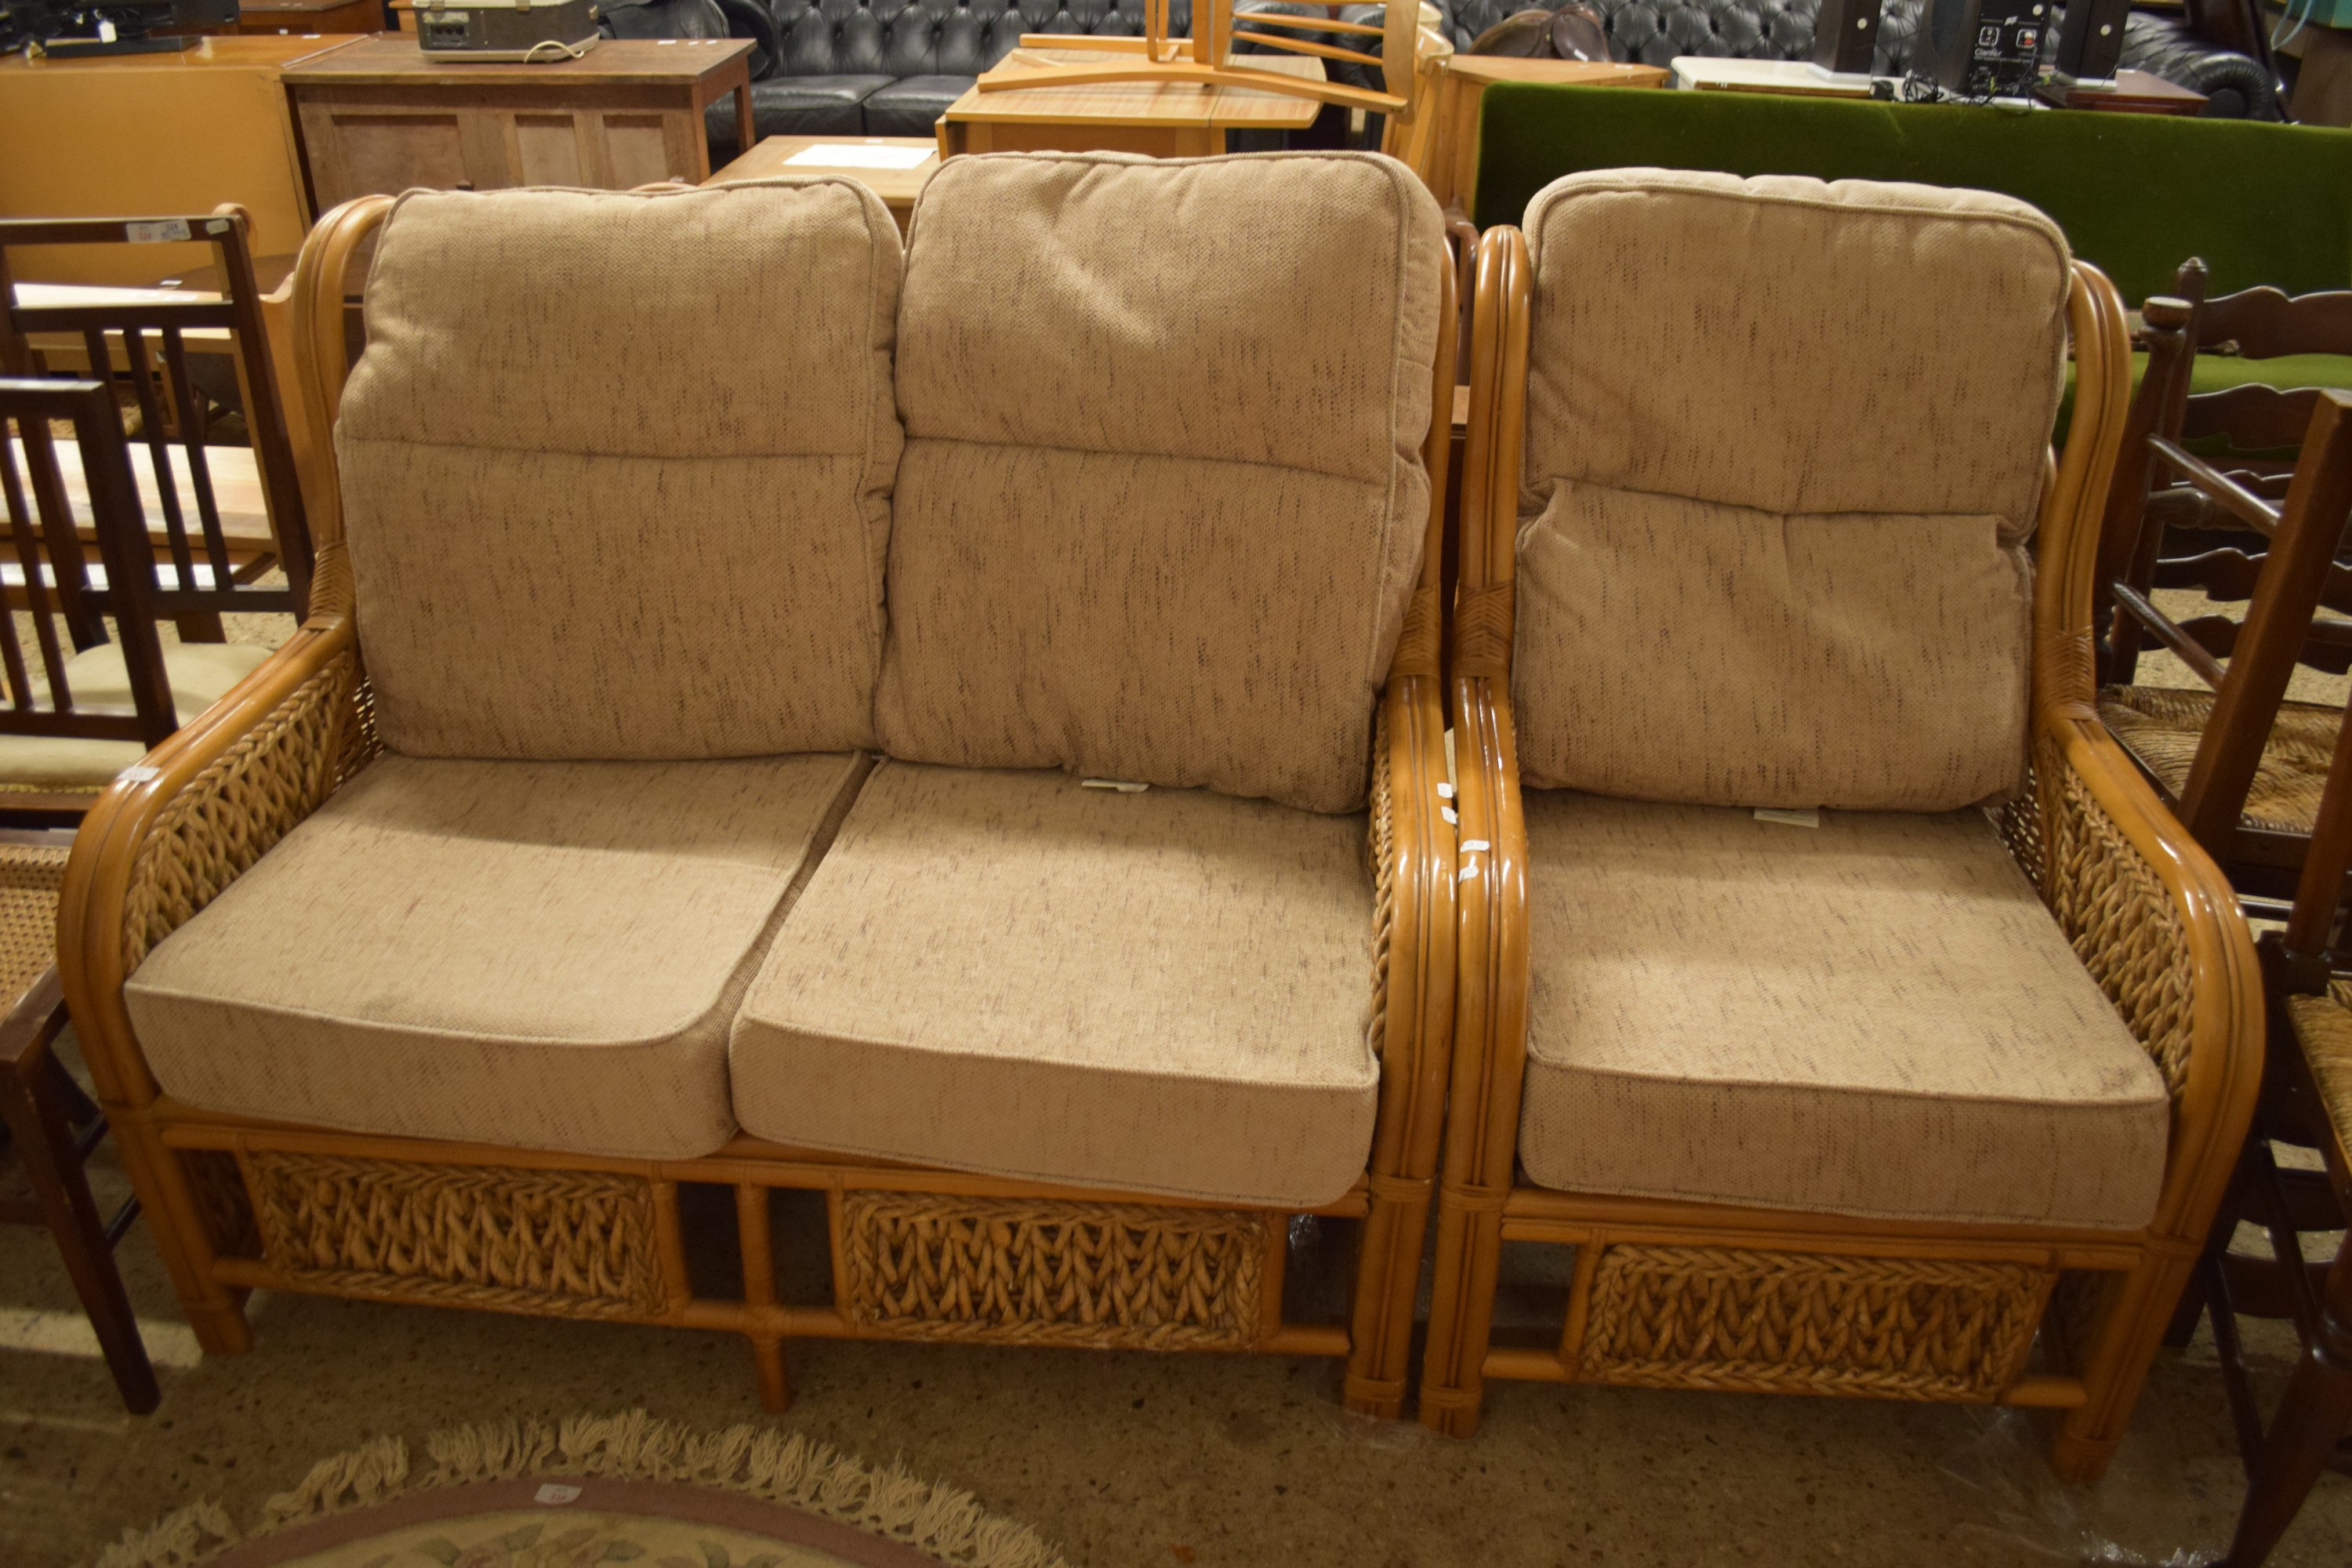 TWO-PIECE CANE CONSERVATORY SUITE COMPRISING TWO-SEATER SOFA AND CHAIR, THE SOFA APPROX 120CM